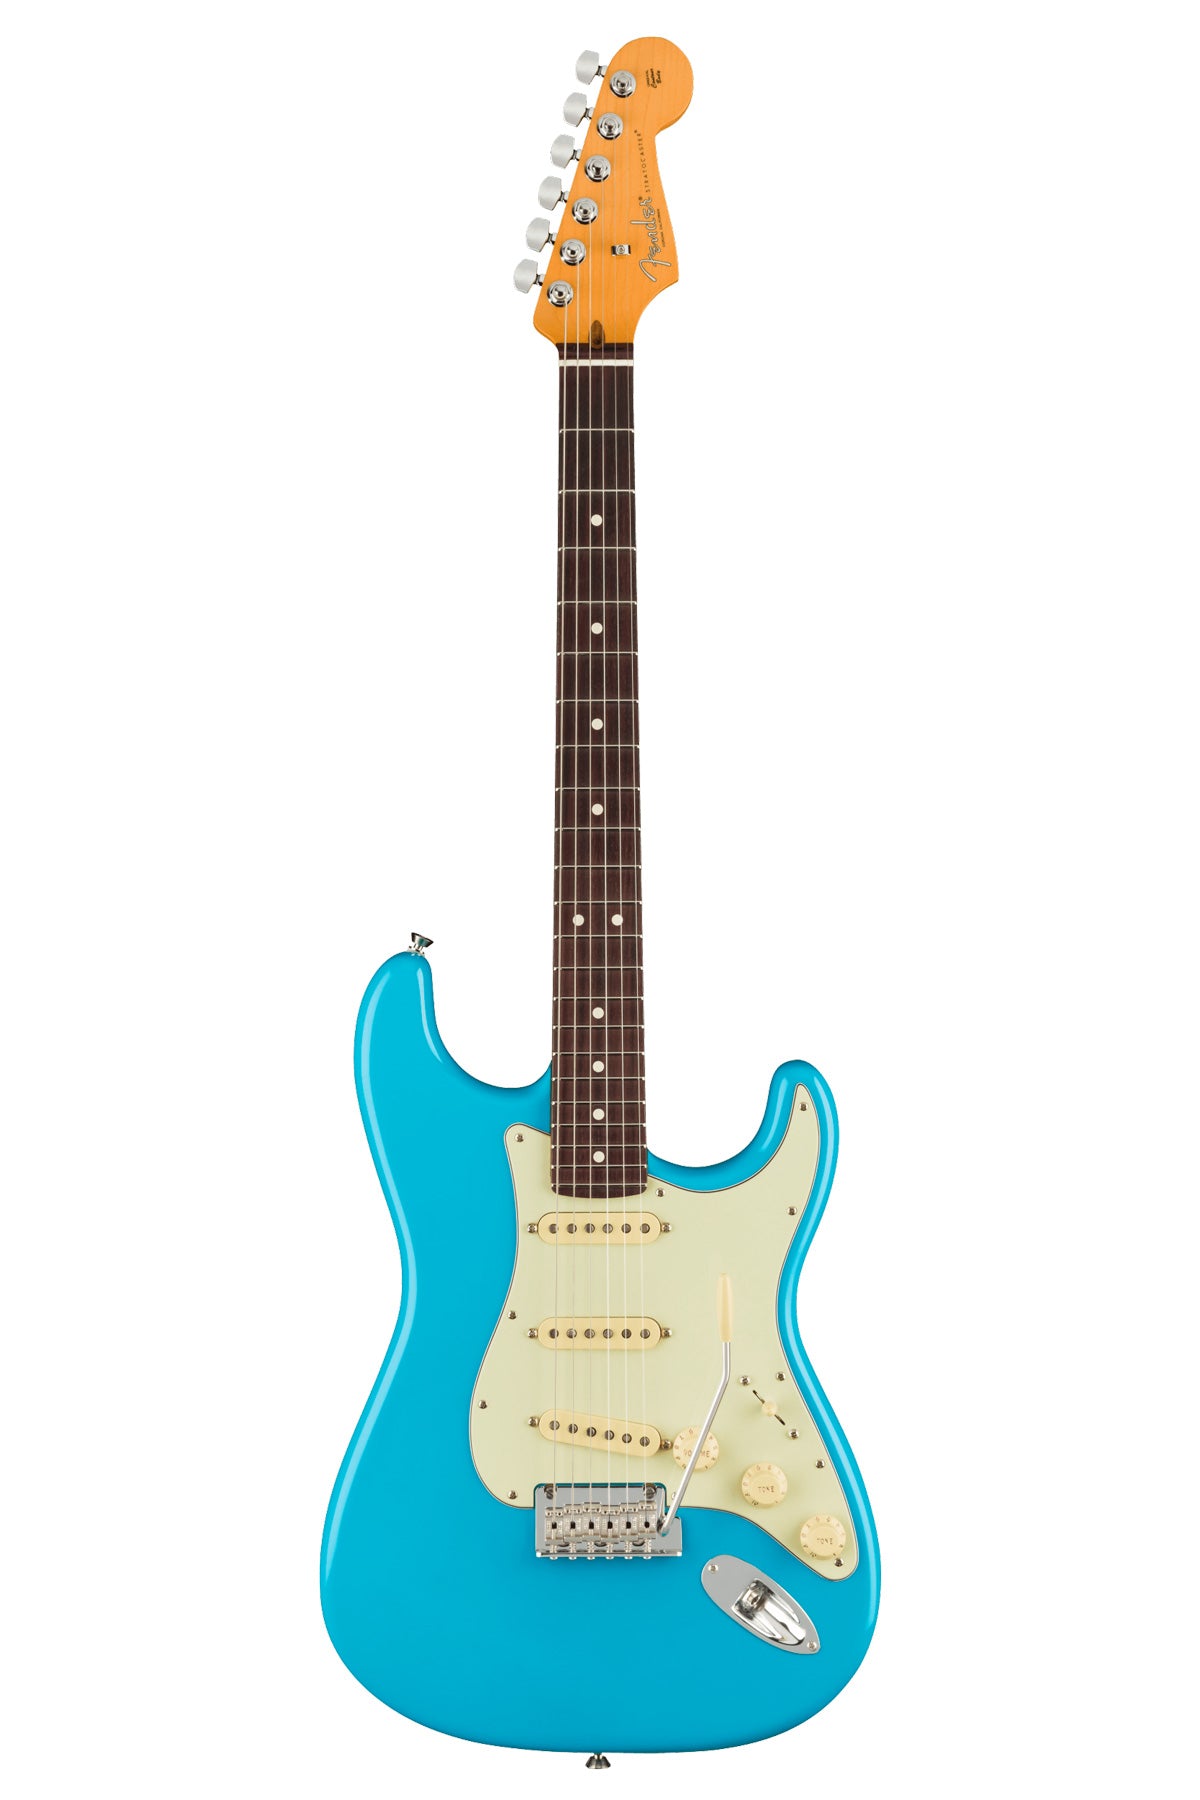 Fender American Professional II Stratocaster, Rosewood Fingerboard - Miami Blue